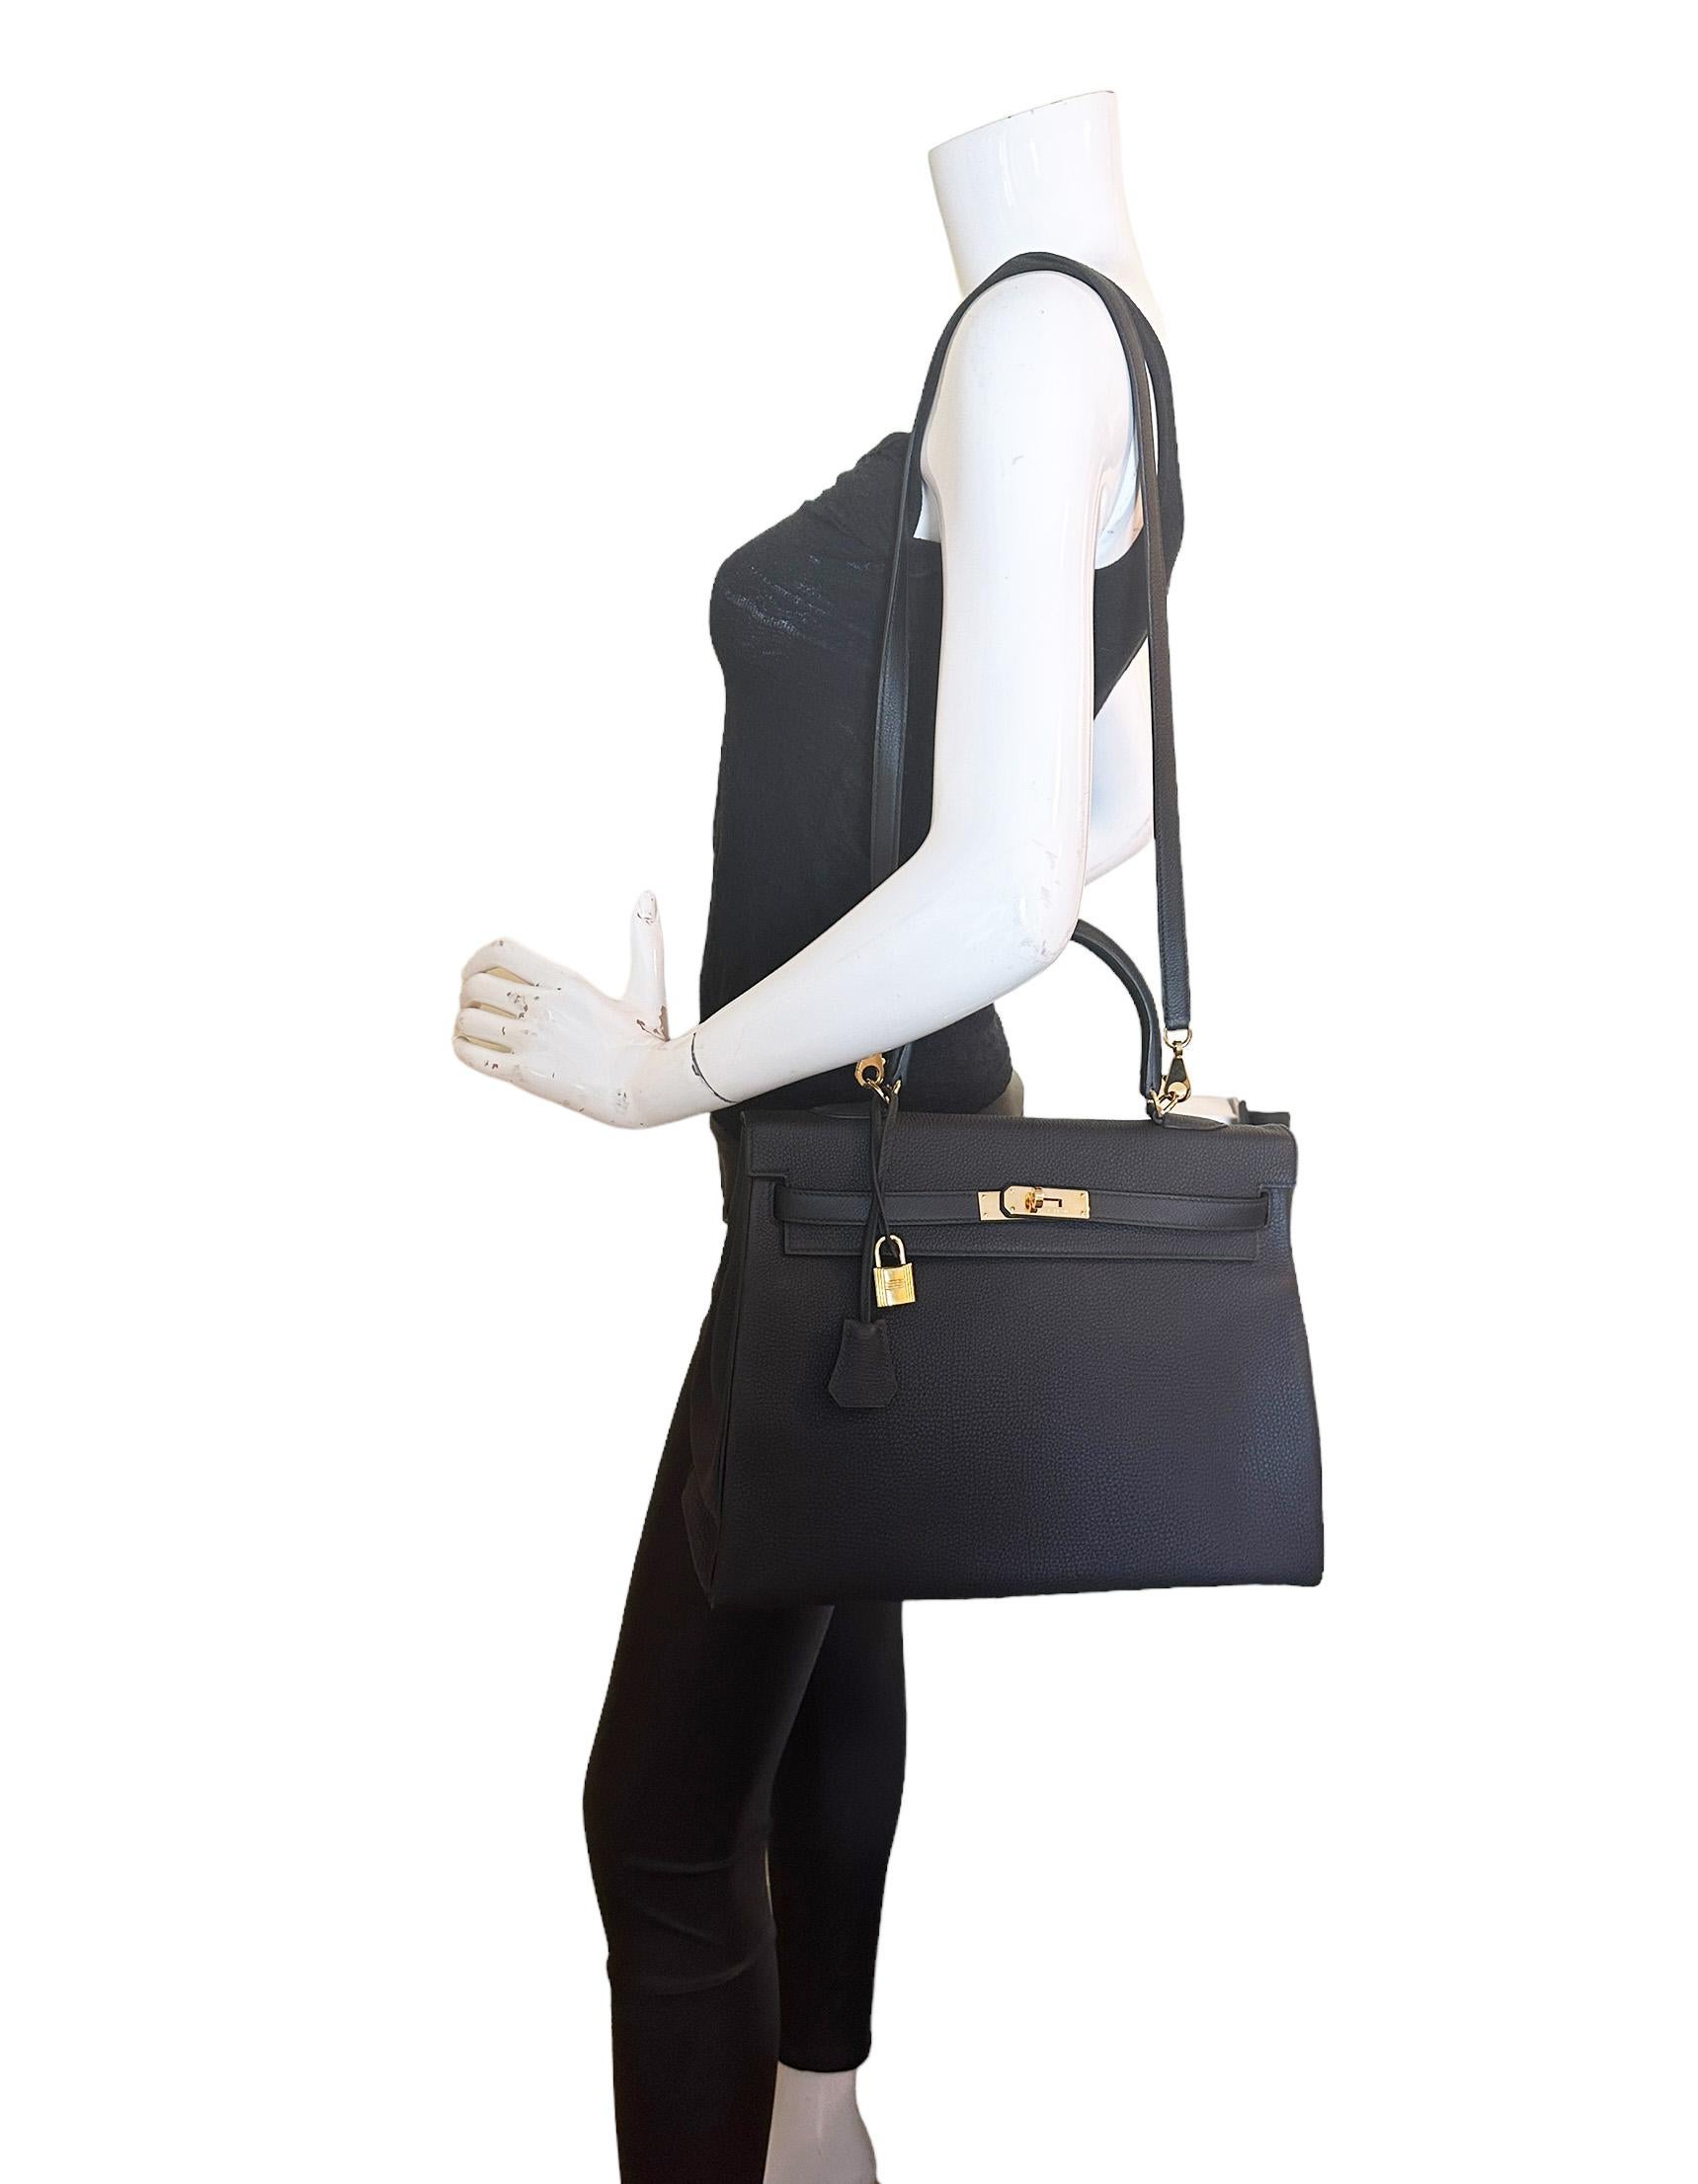 Hermes Black Togo Leather 35cm Kelly Bag w/ GHW
Made in: France
Year of Production: 2020
Color: Black
Materials: Togo leather
Lining: Black chevre leather
Hardware: Goldtone
Exterior Pockets: N/A
Interior Pockets: One zippered, two open
Closure: